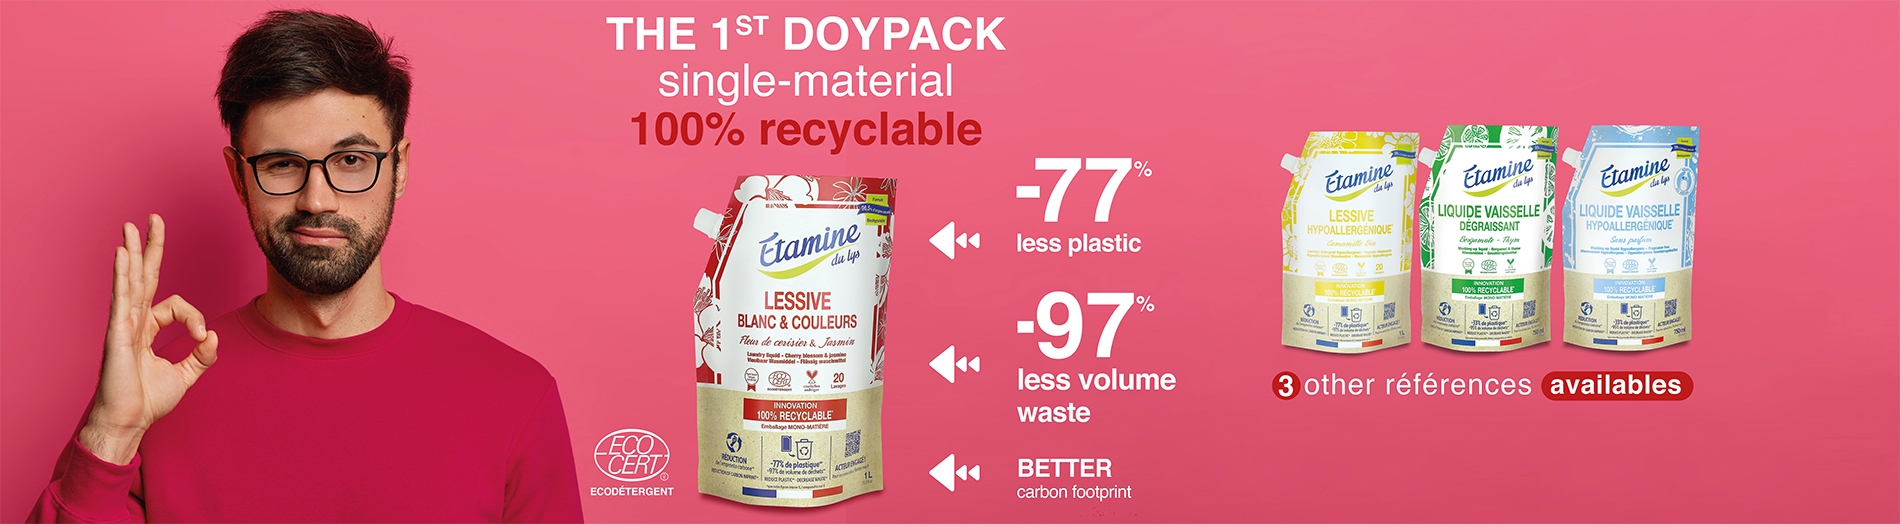 Doypack 100% recyclable